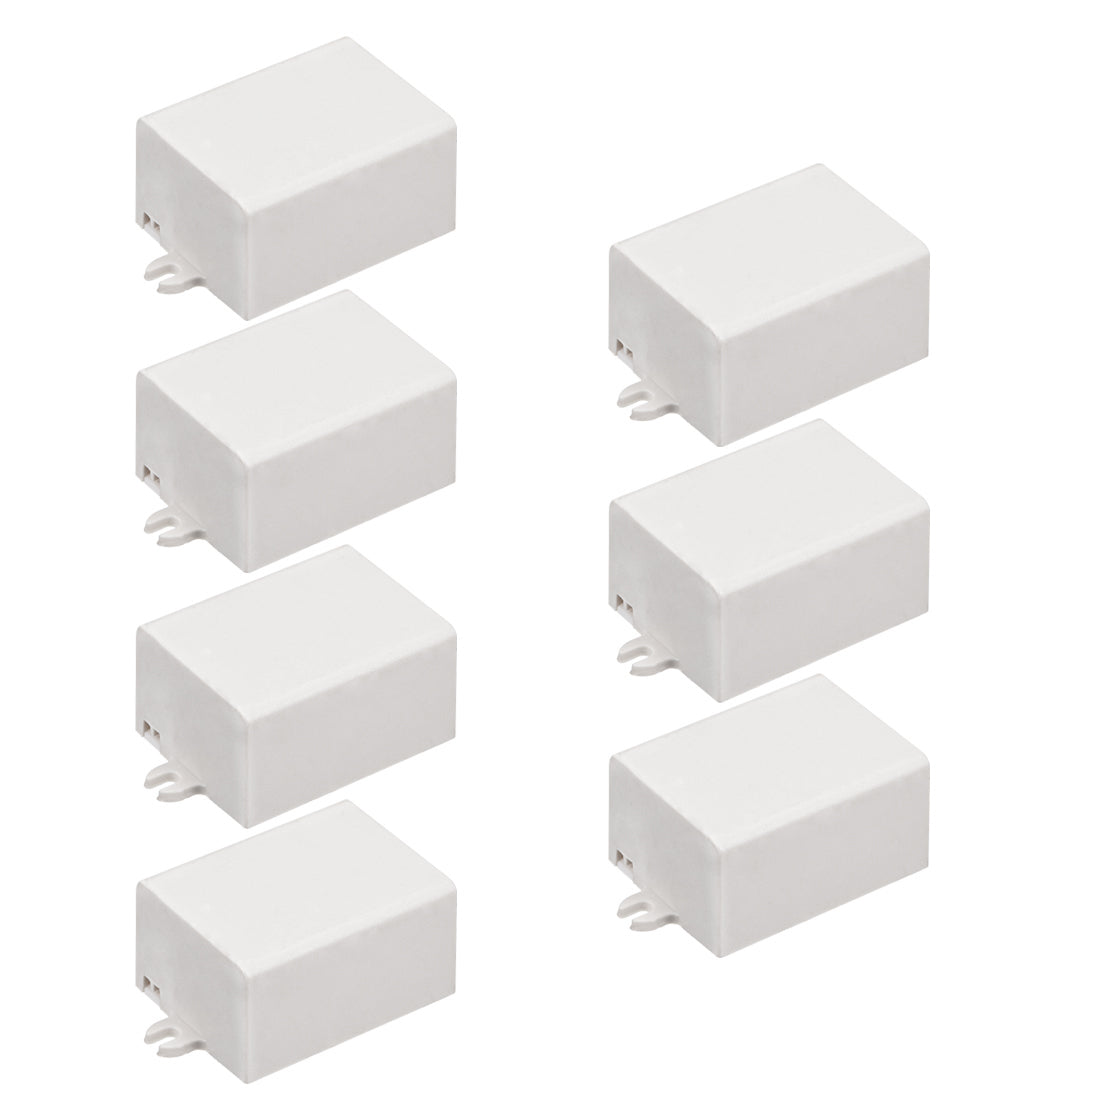 uxcell Uxcell 7Pcs 46 x 35 x 24mm Electronic Plastic DIY Junction Box Enclosure Case White